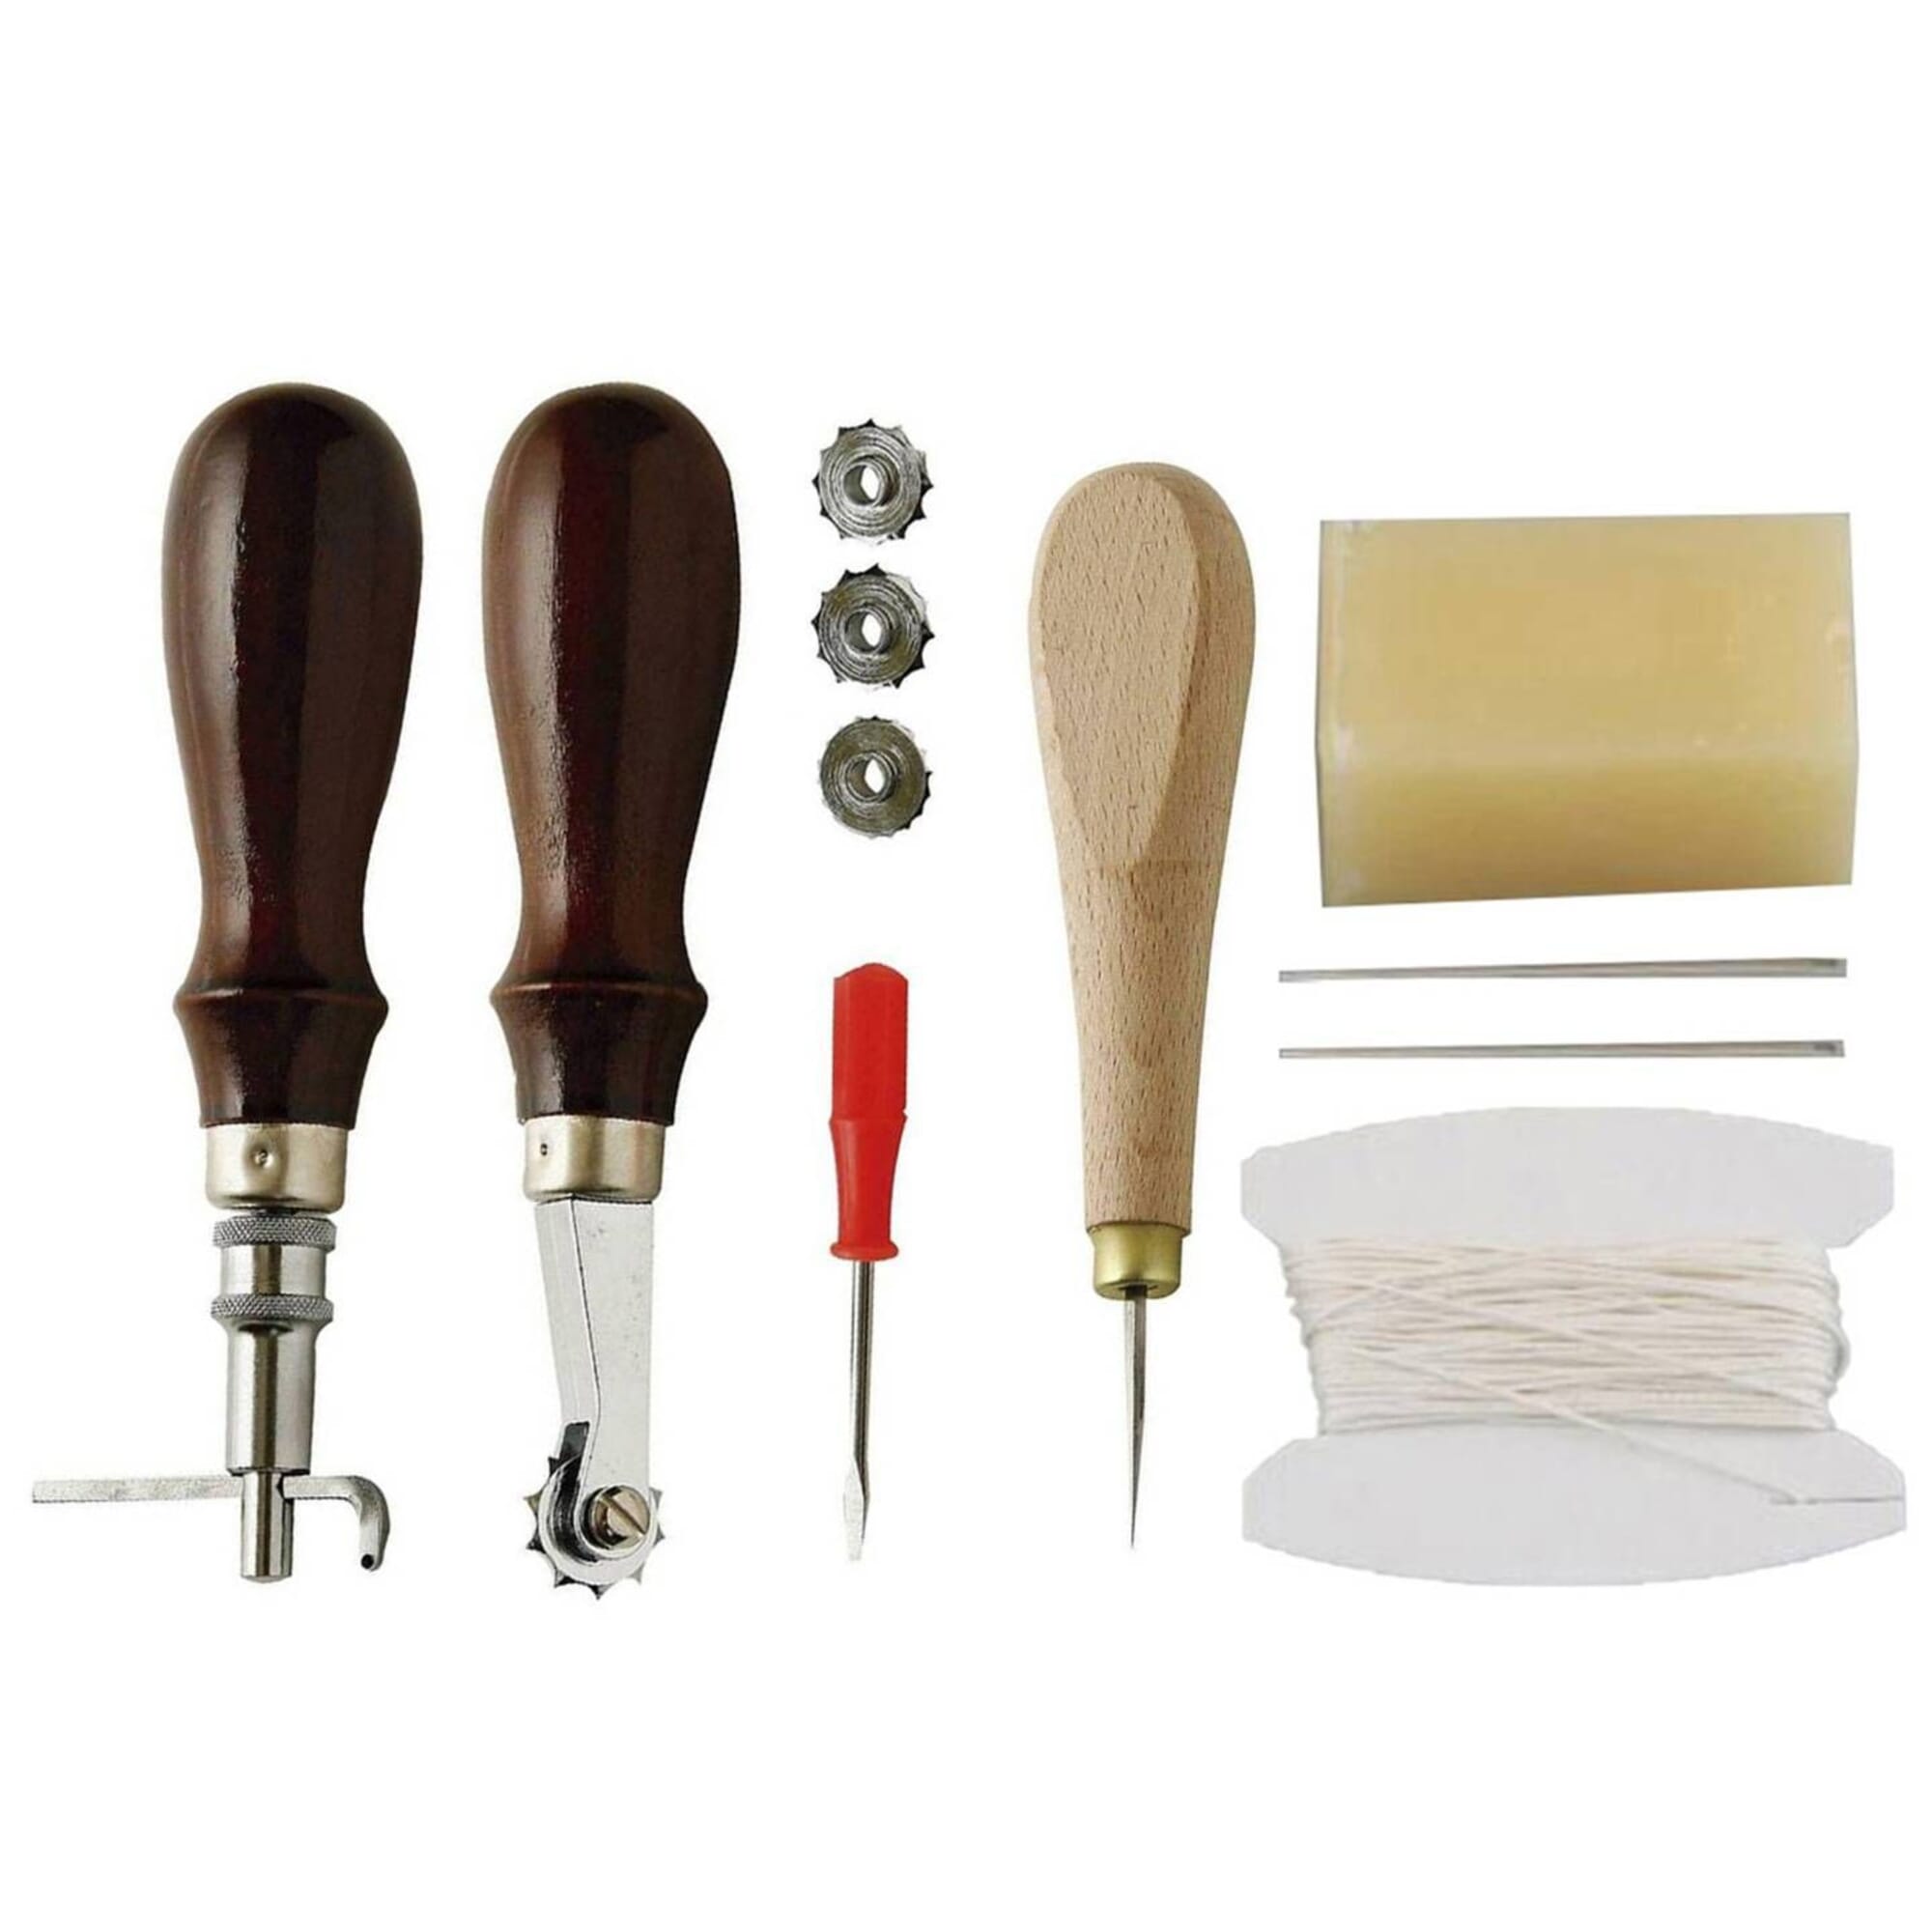 Craft Sha Leathercraft Sewing Kit with Groover, Awl, Wax, Thread, Needles and R